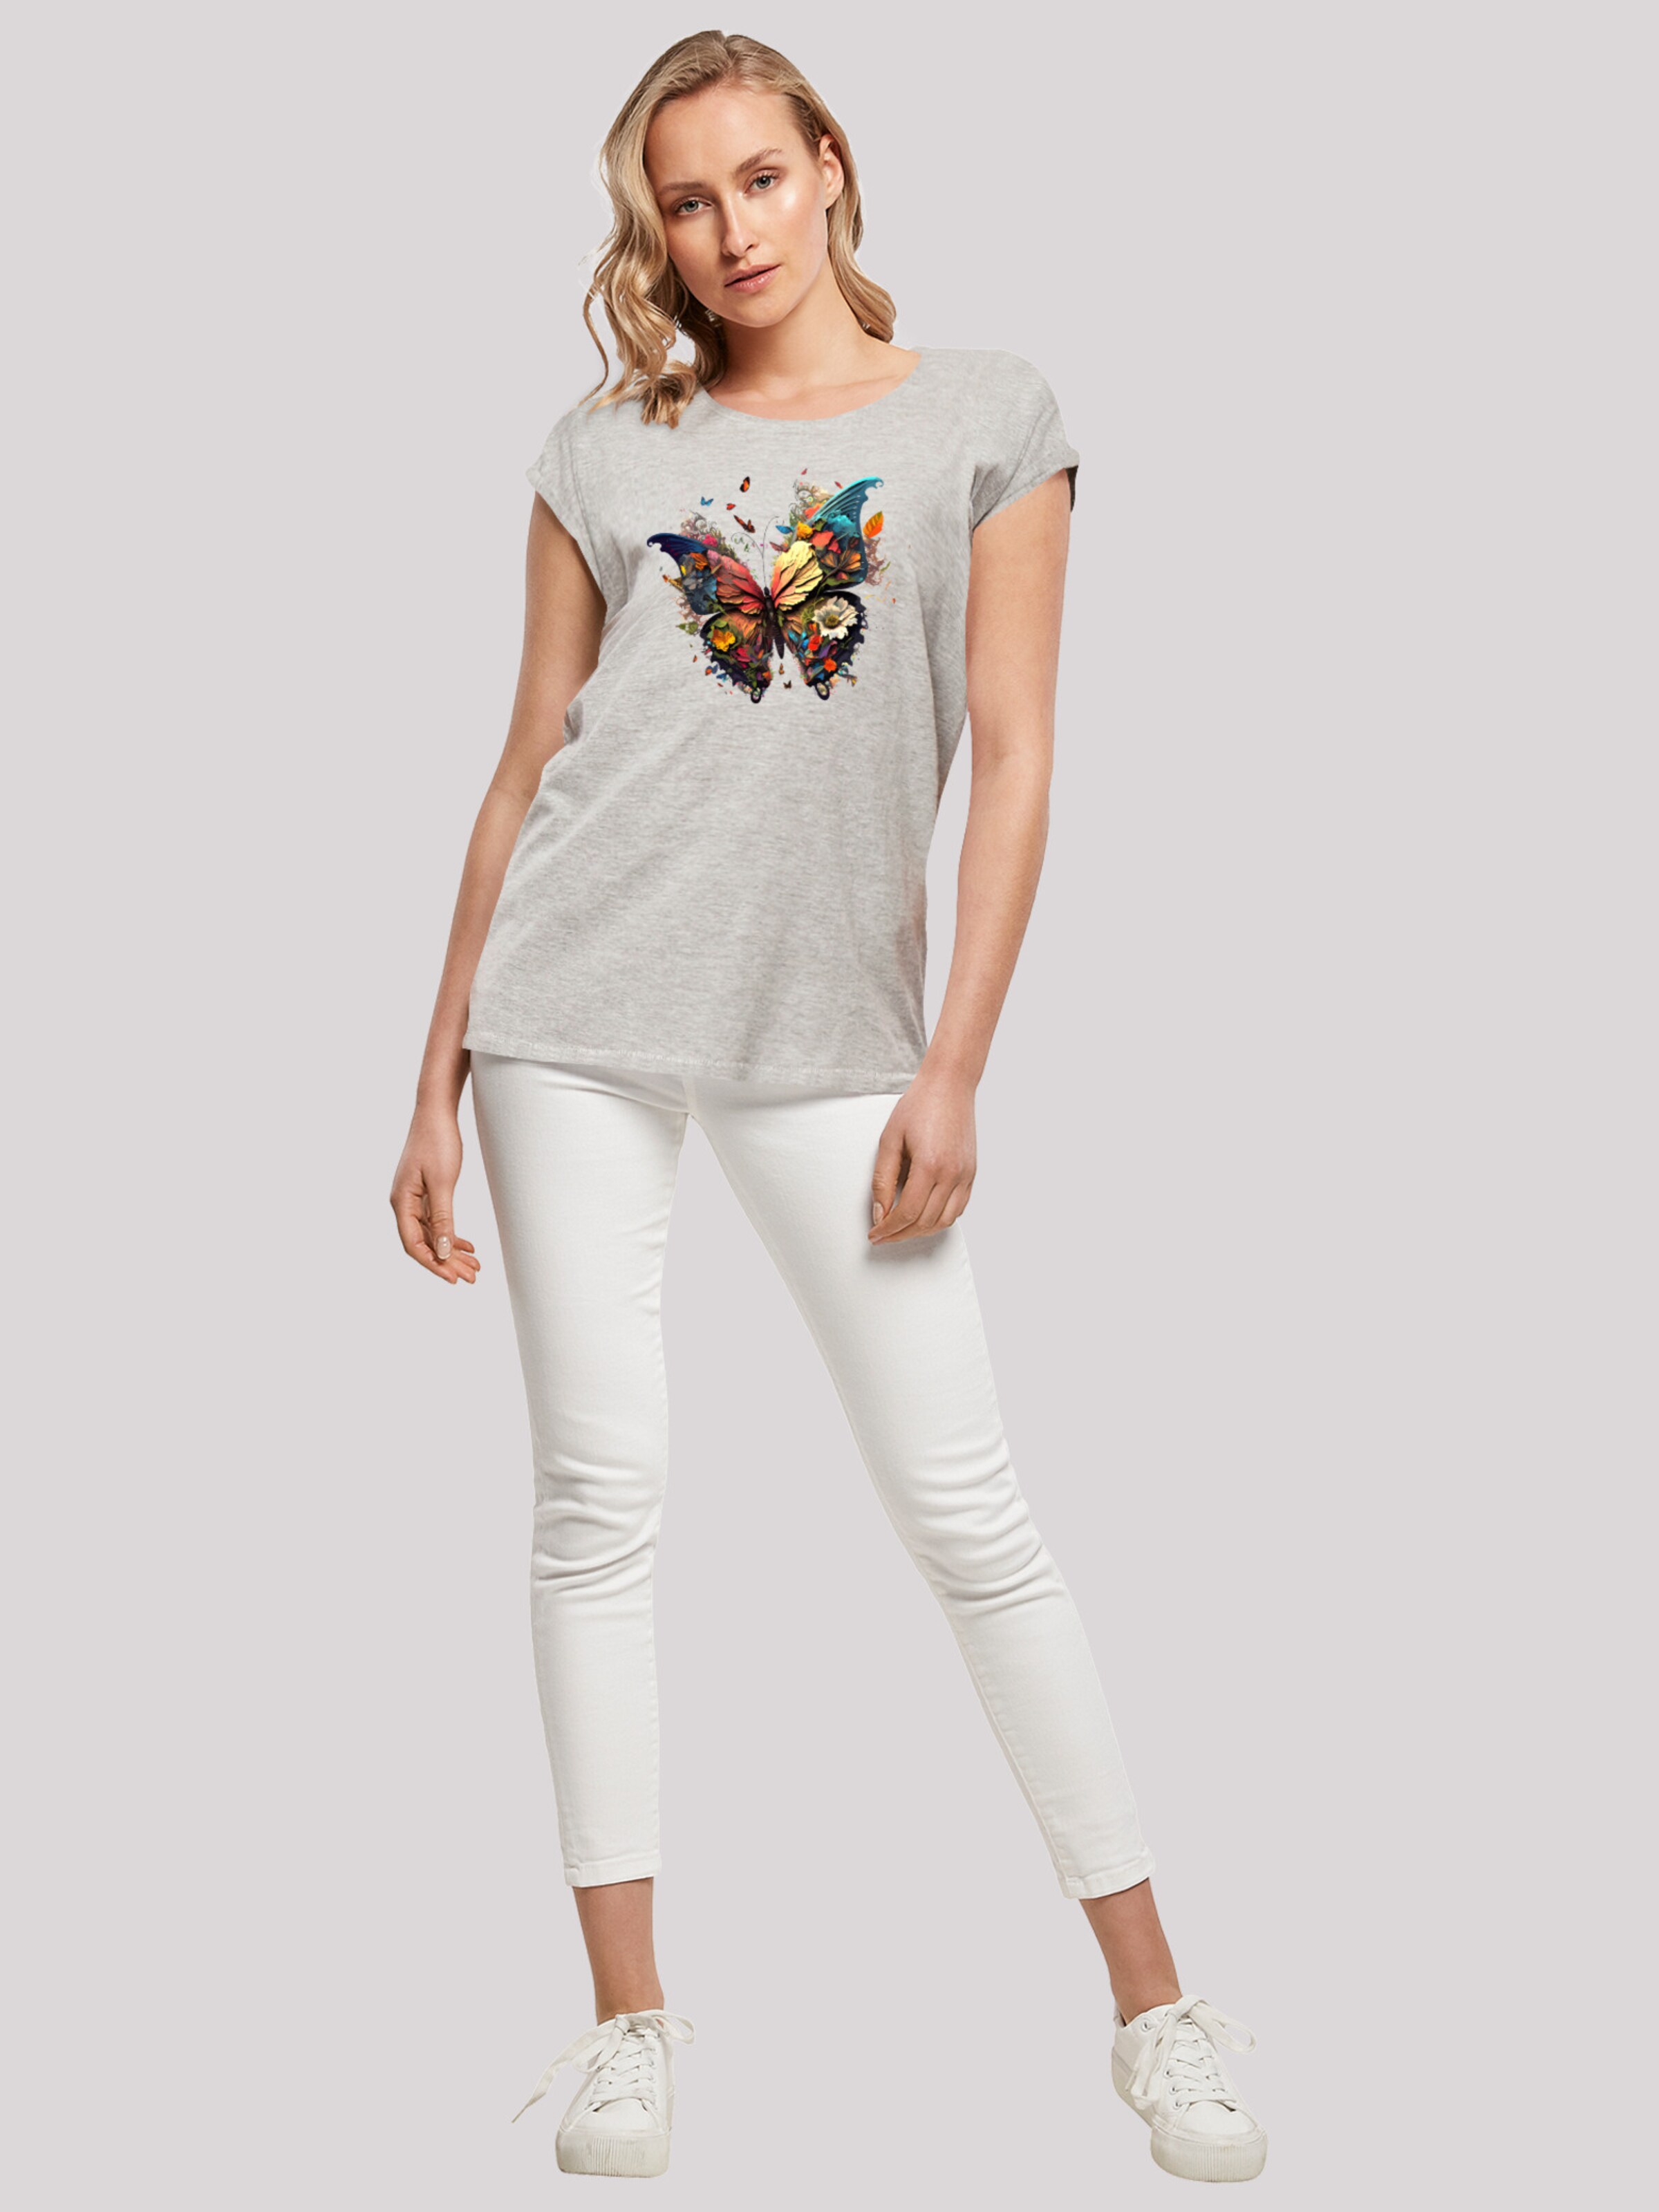 \'Schmetterling\' Grey YOU | in Shirt ABOUT F4NT4STIC